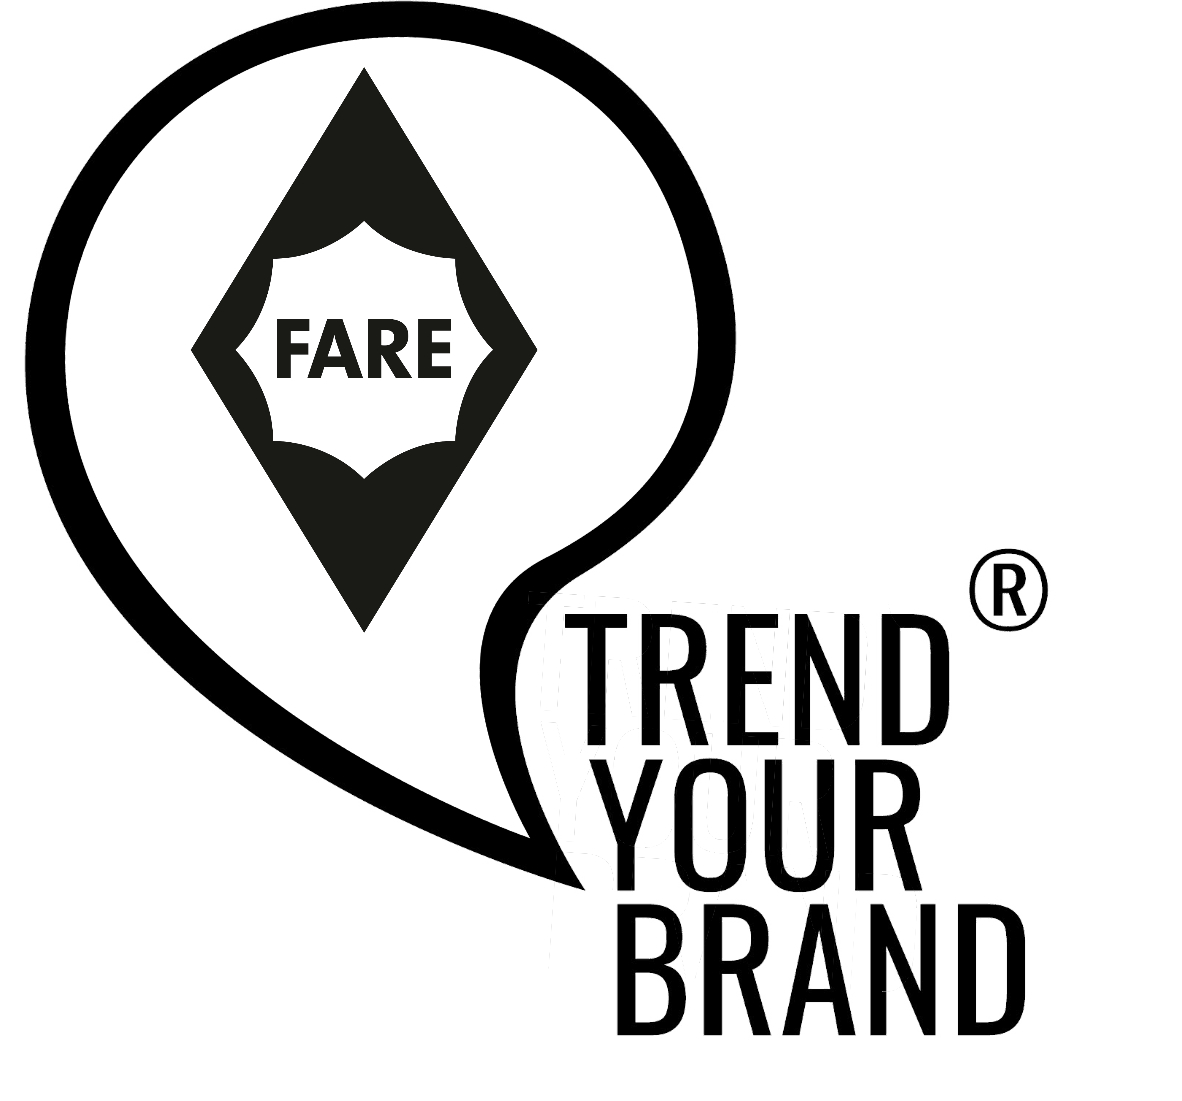 FARE by TrendyourBrand